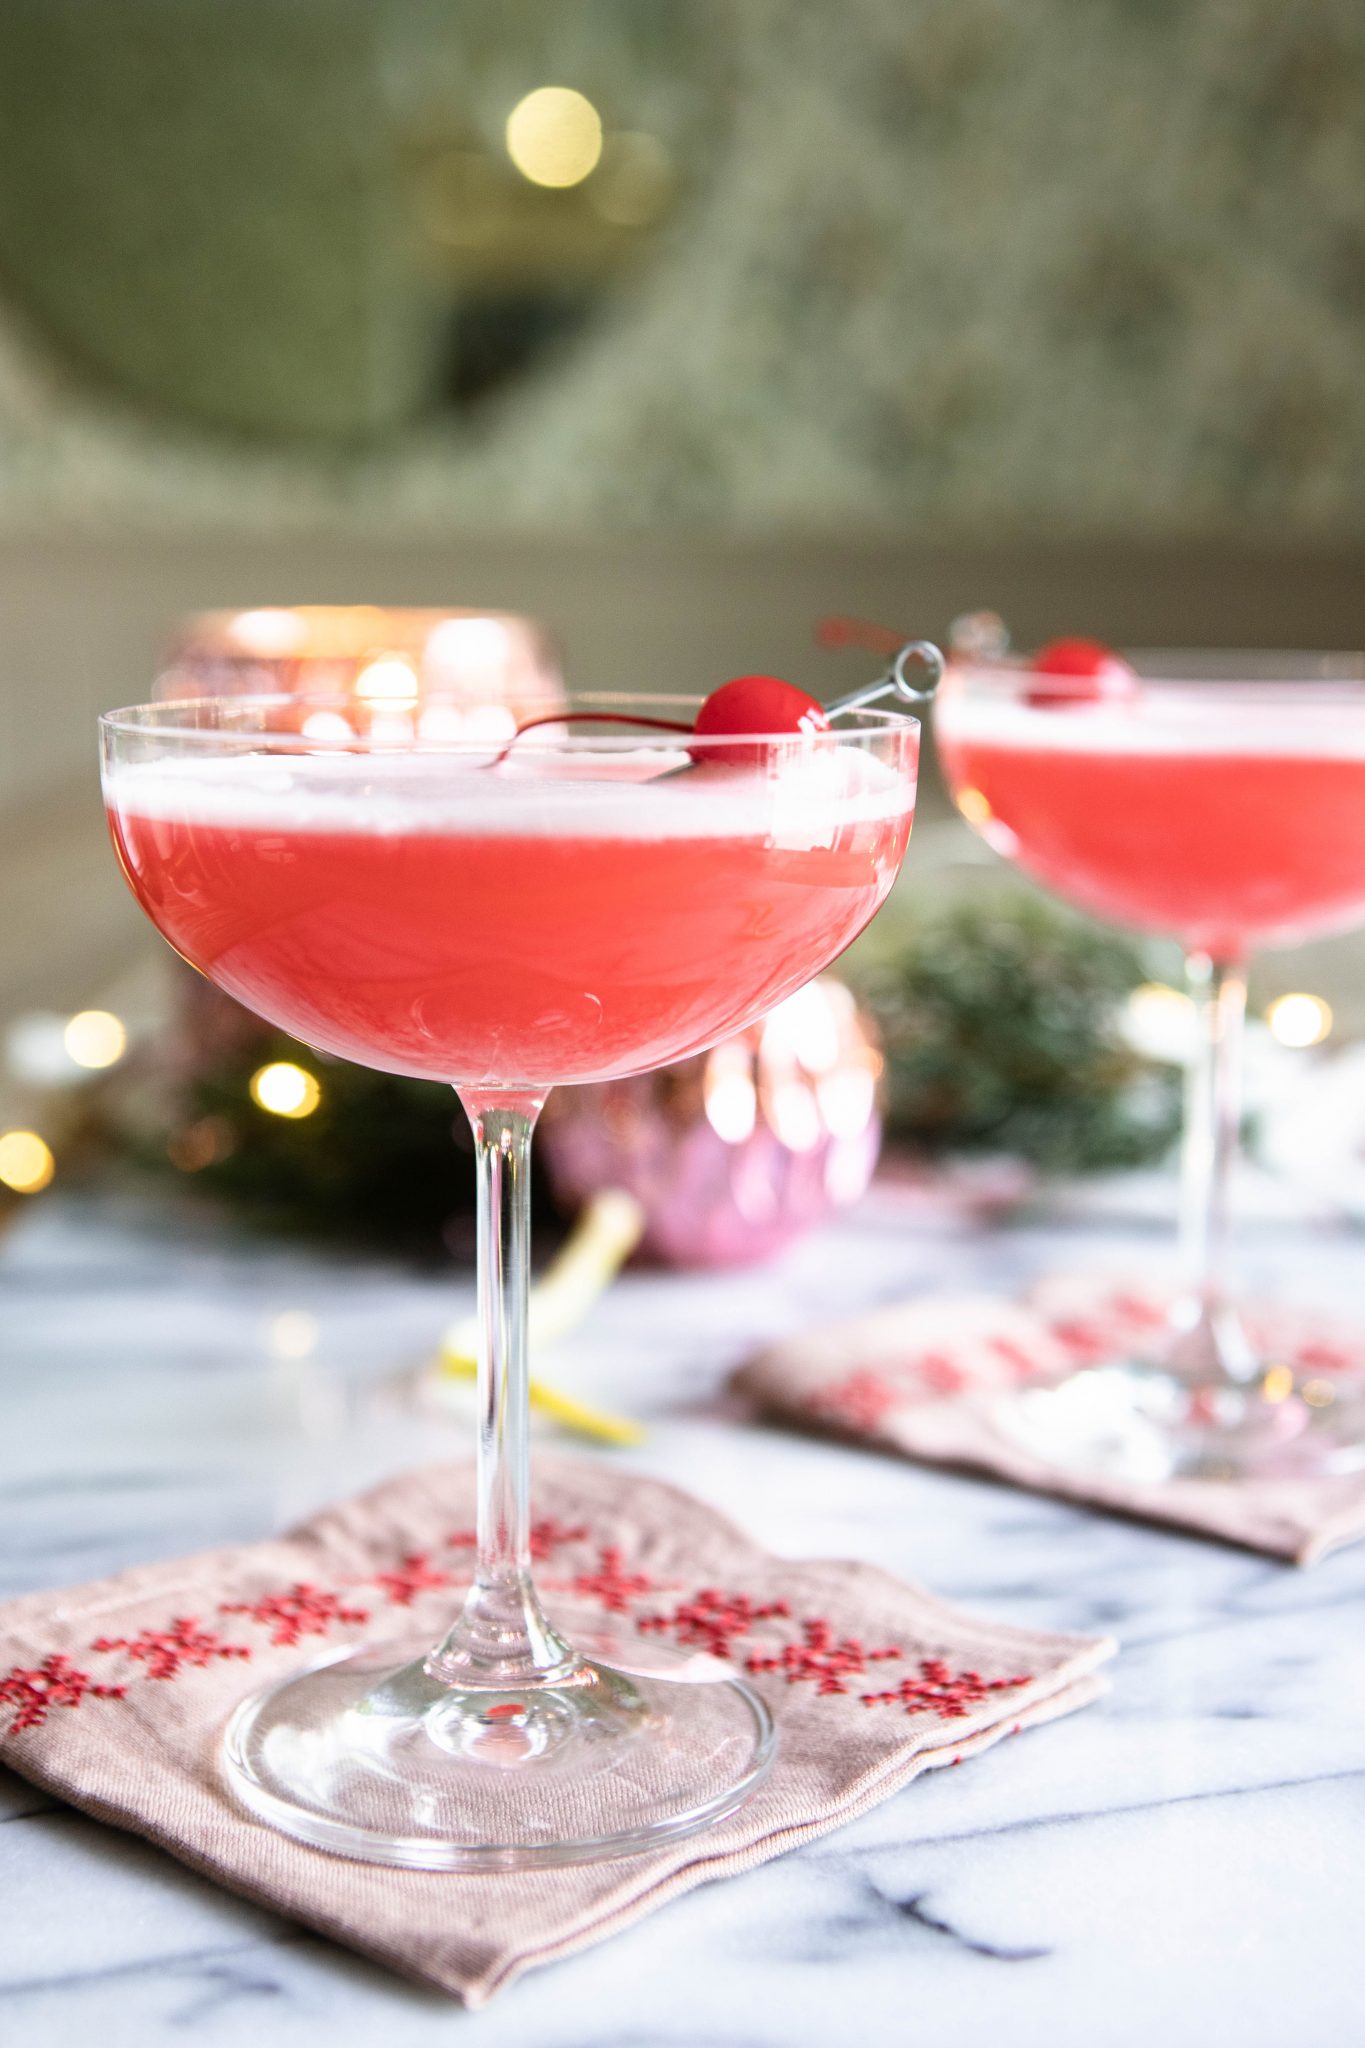 2 coupe glasses filled with a pink cocktail and garnished with a maraschino cherry and lemon peel, against a marble backdrop